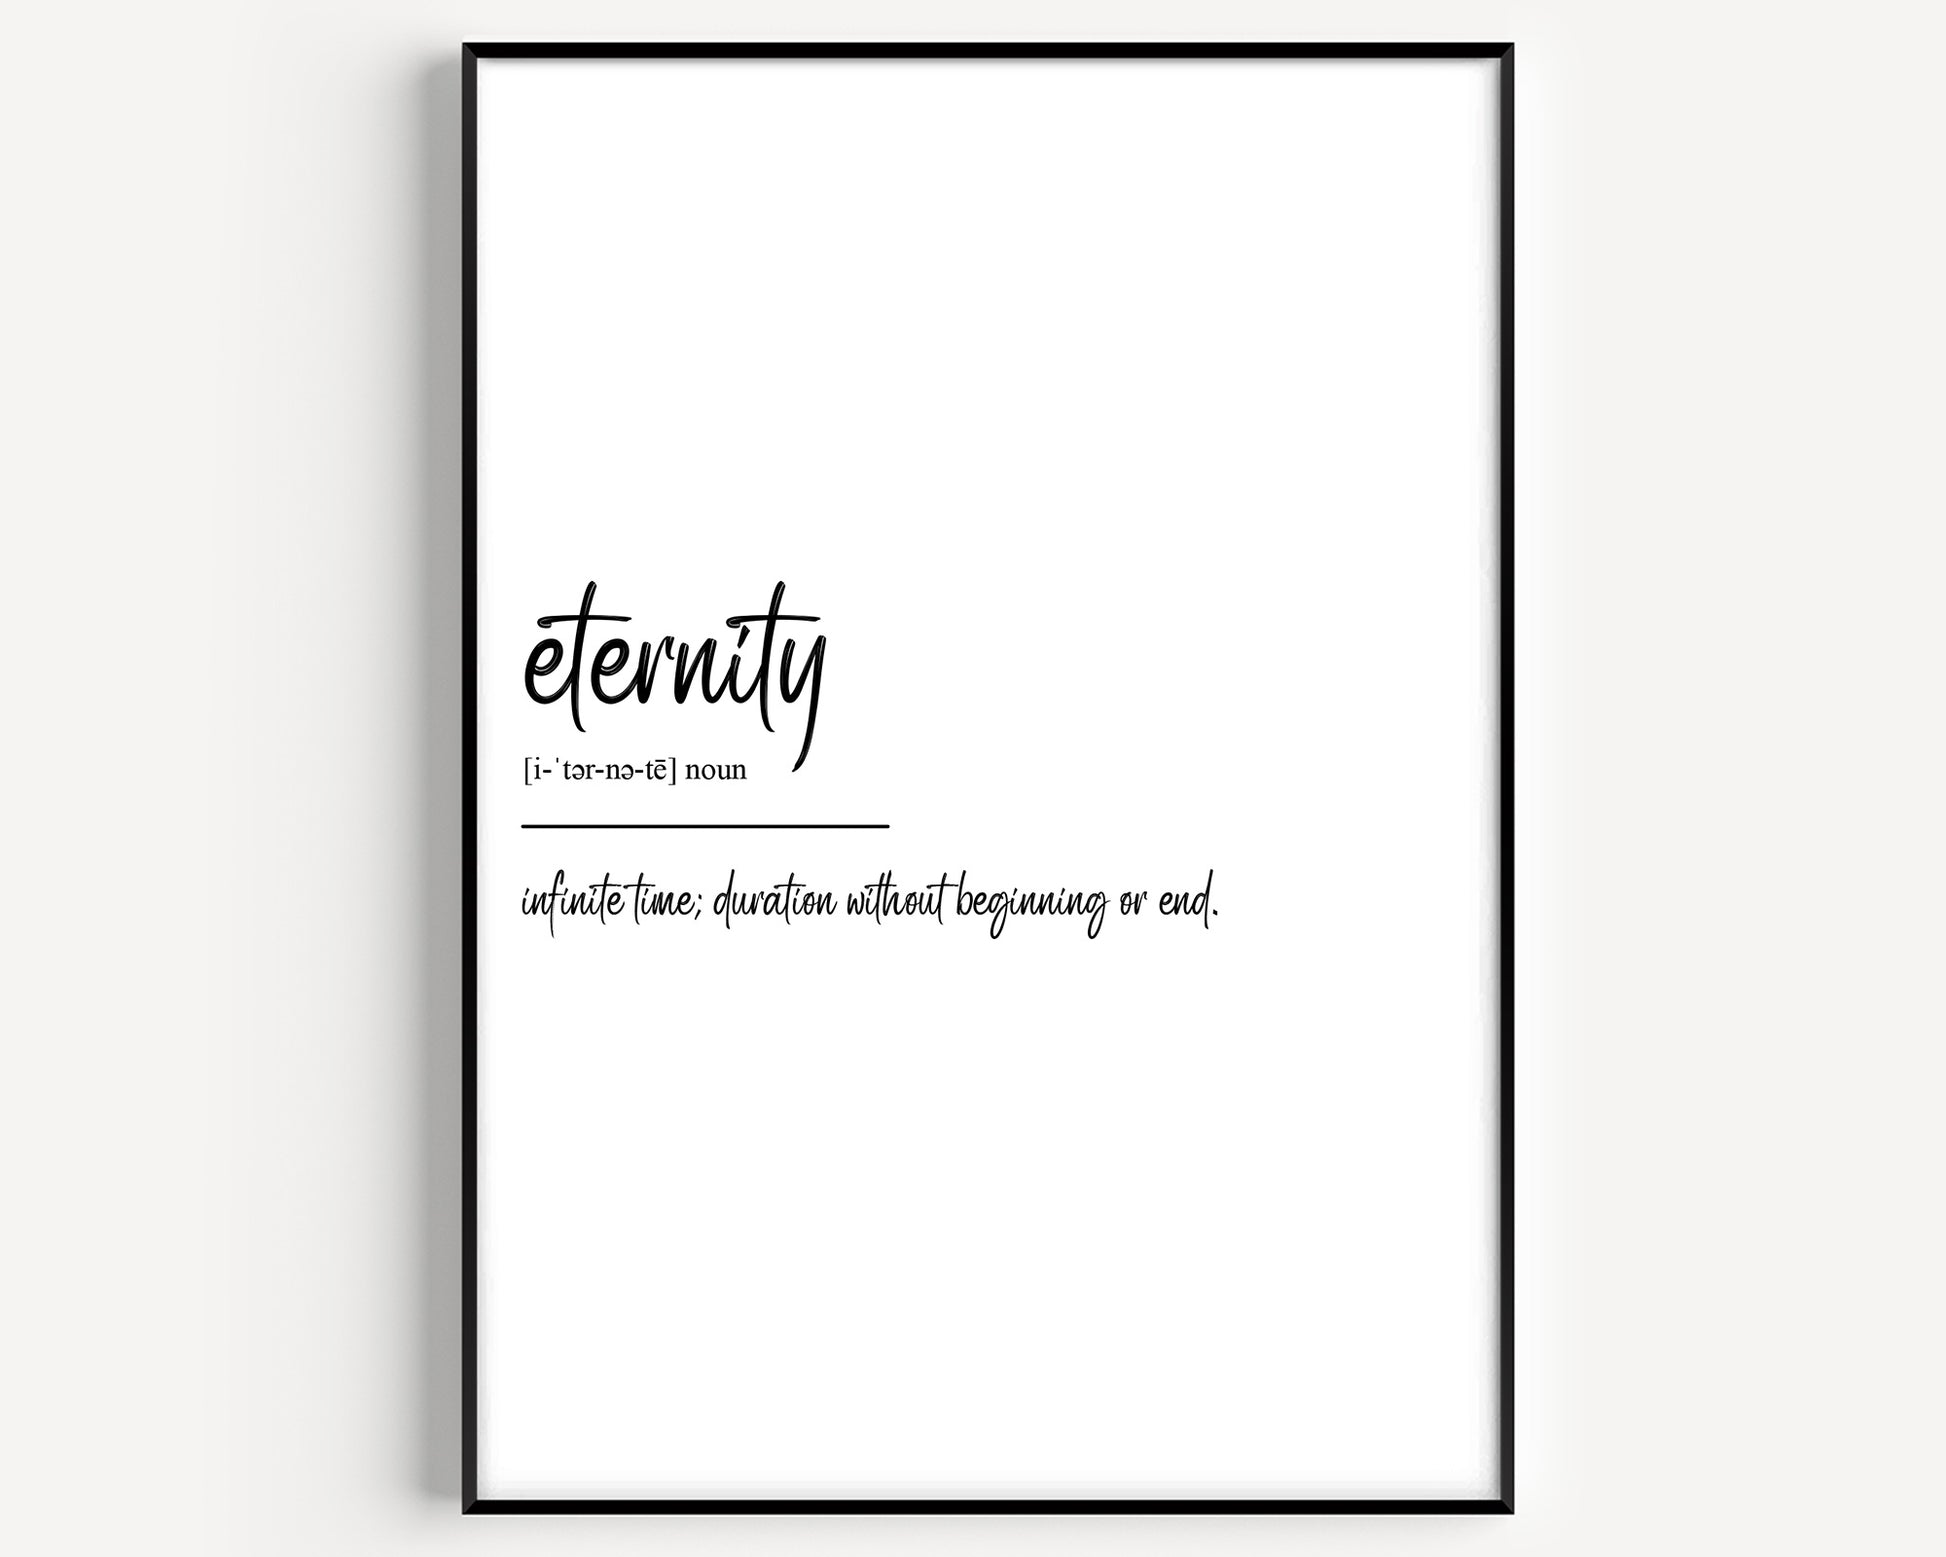 Eternity Definition Print - Magic Posters